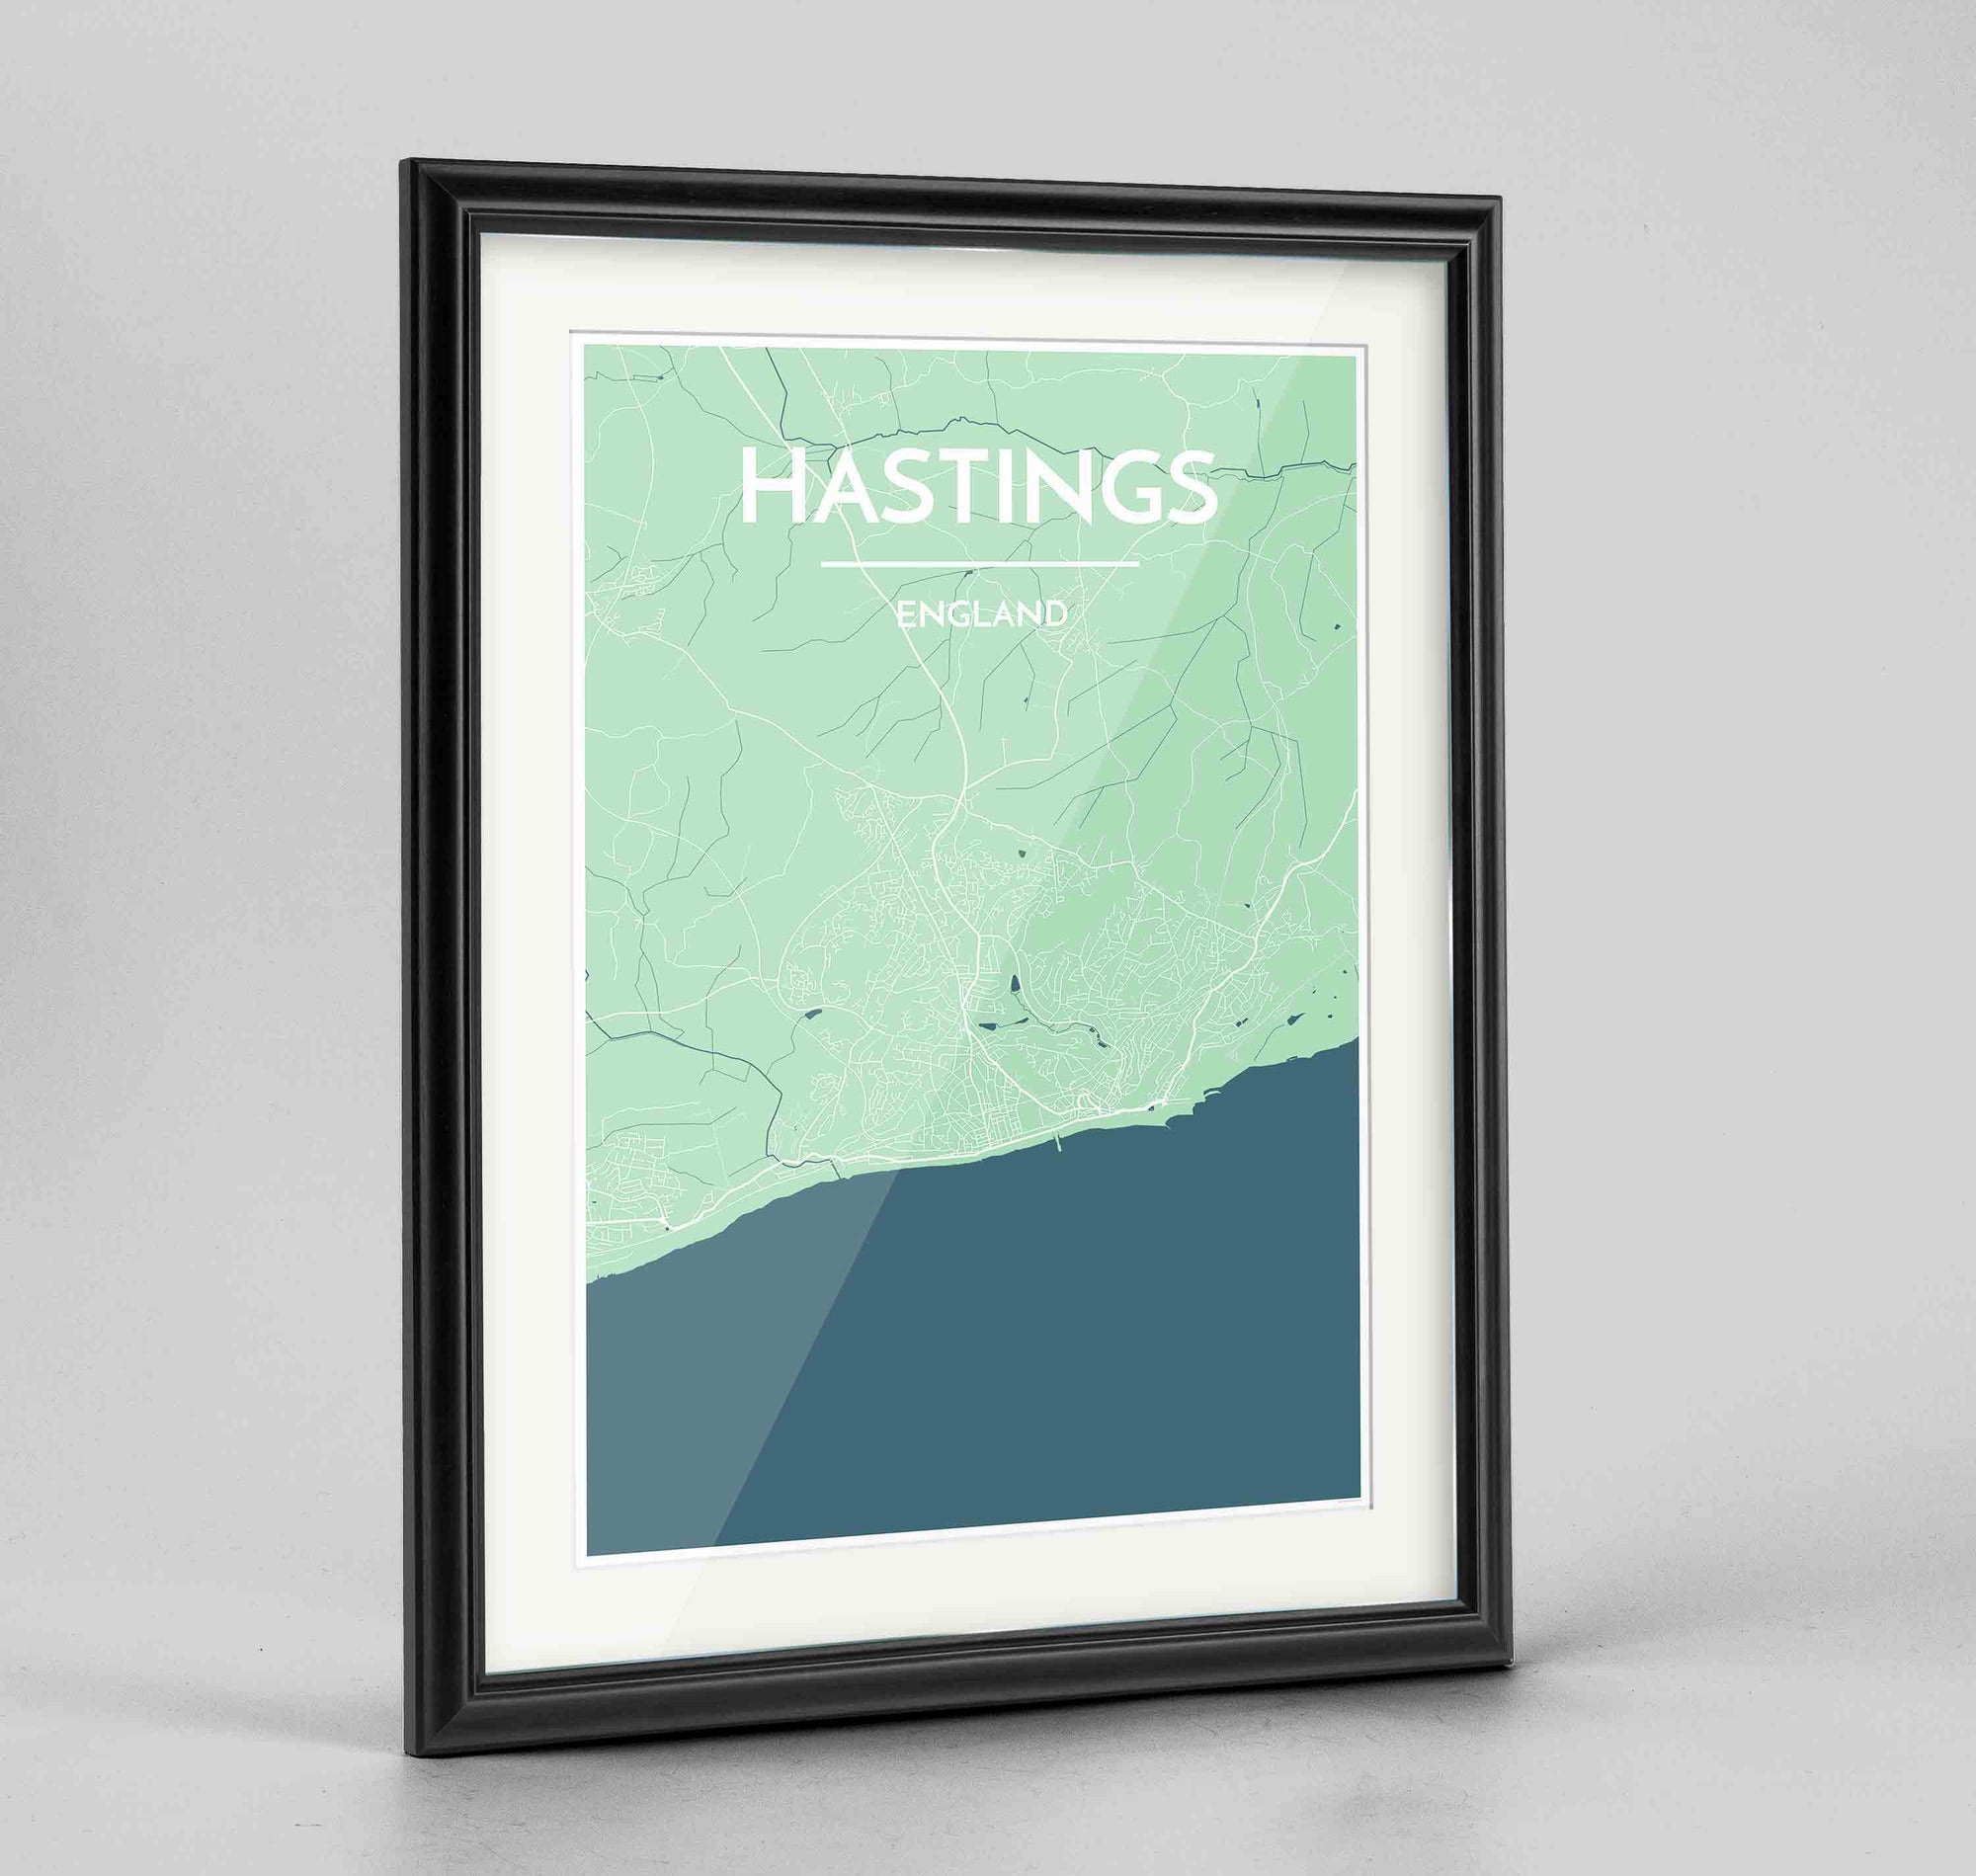 Framed Hastings Map Art Print 24x36" Traditional Black frame Point Two Design Group